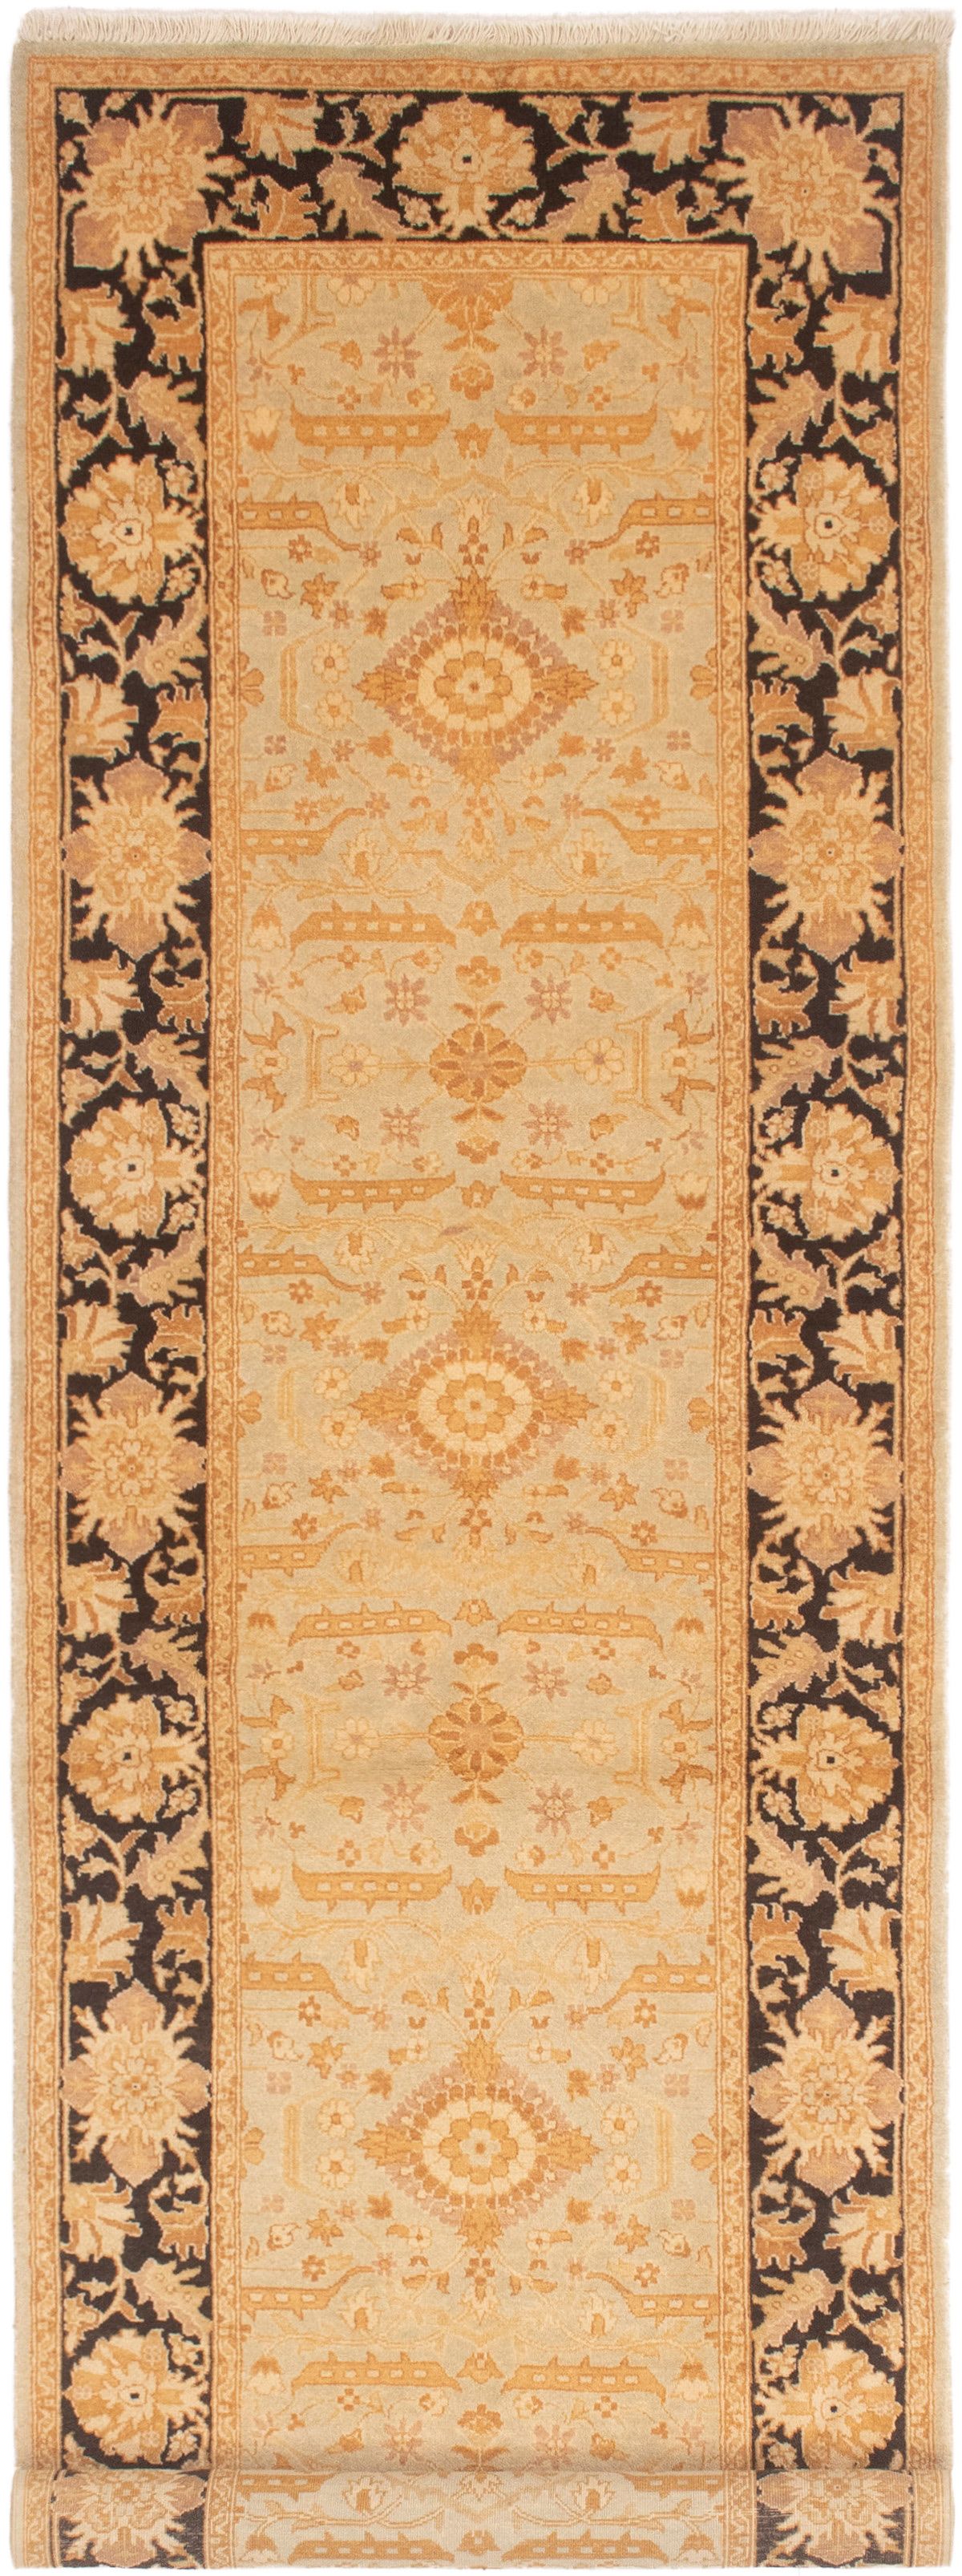 Hand-knotted Peshawar Finest Light Grey Wool Rug 3'2" x 11'7" Size: 3'2" x 11'7"  